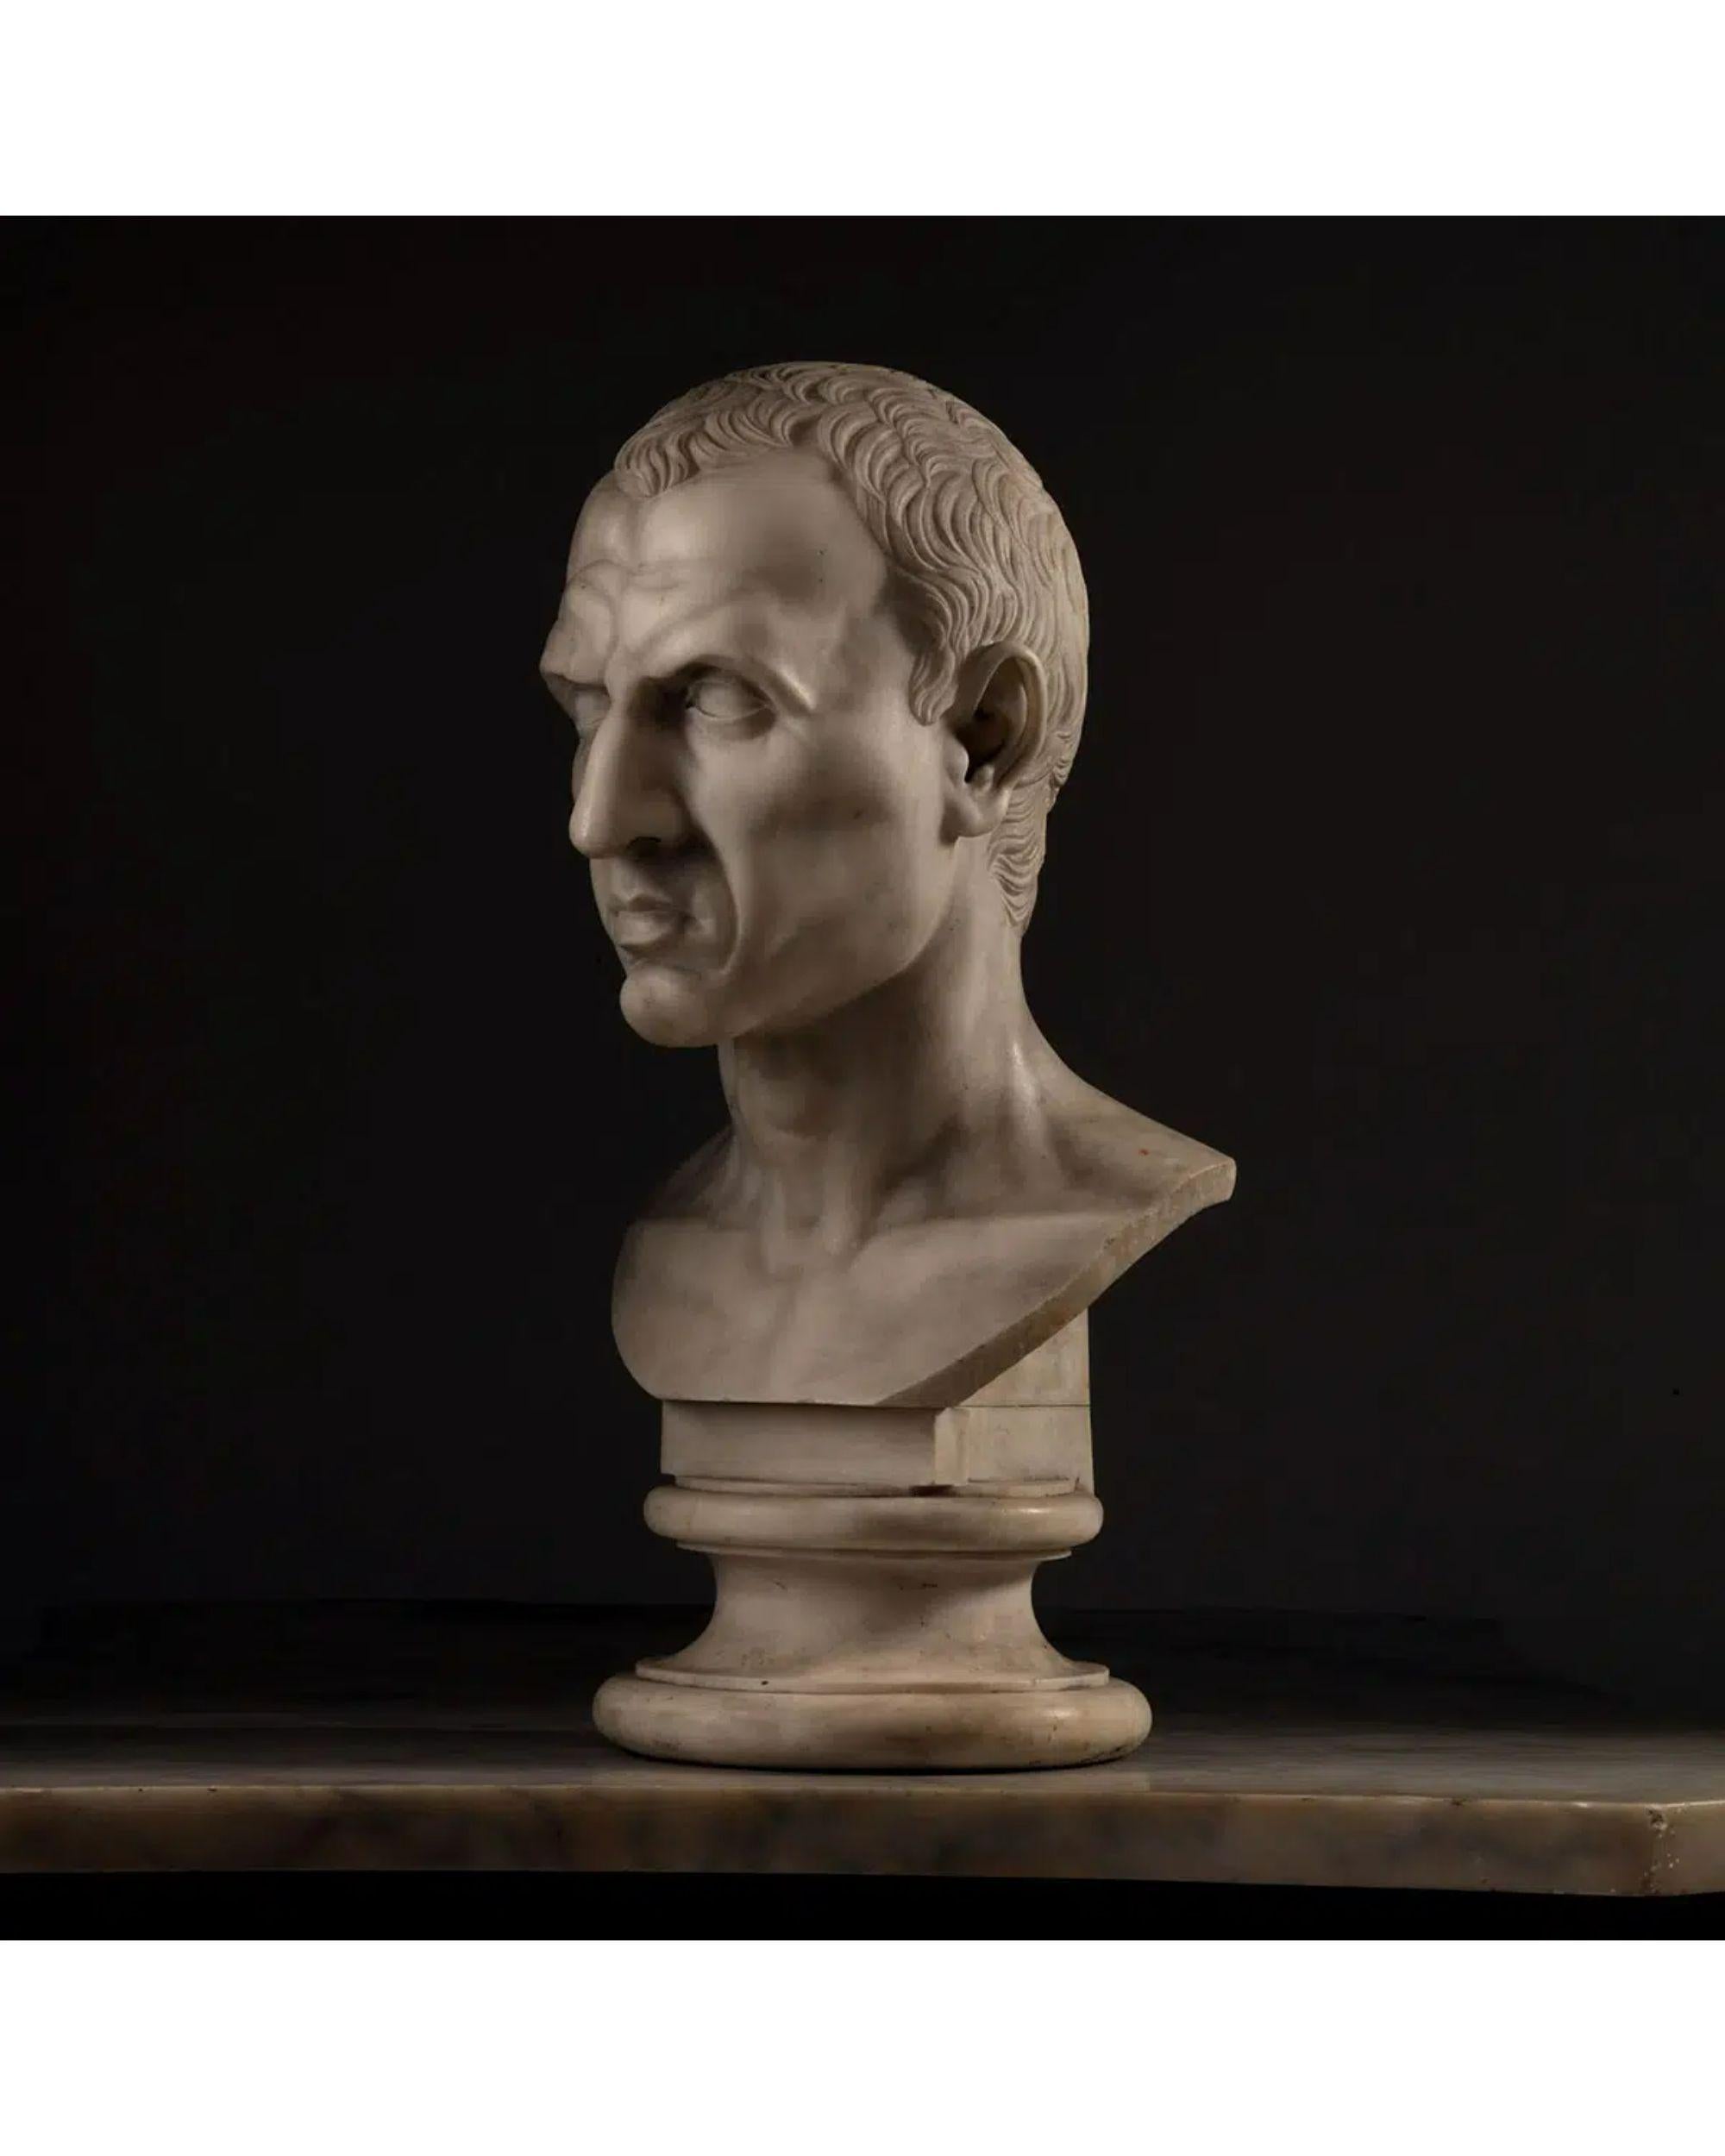 19th Century Grand Tour statuary marble portrait bust of Julius Caesar 12 July 100 BC – 15 March 44 BC

Bust of Julius Caesar
Julius Caesar was a highly regarded statesman and military general who was instrumental in the foundation of the Roman